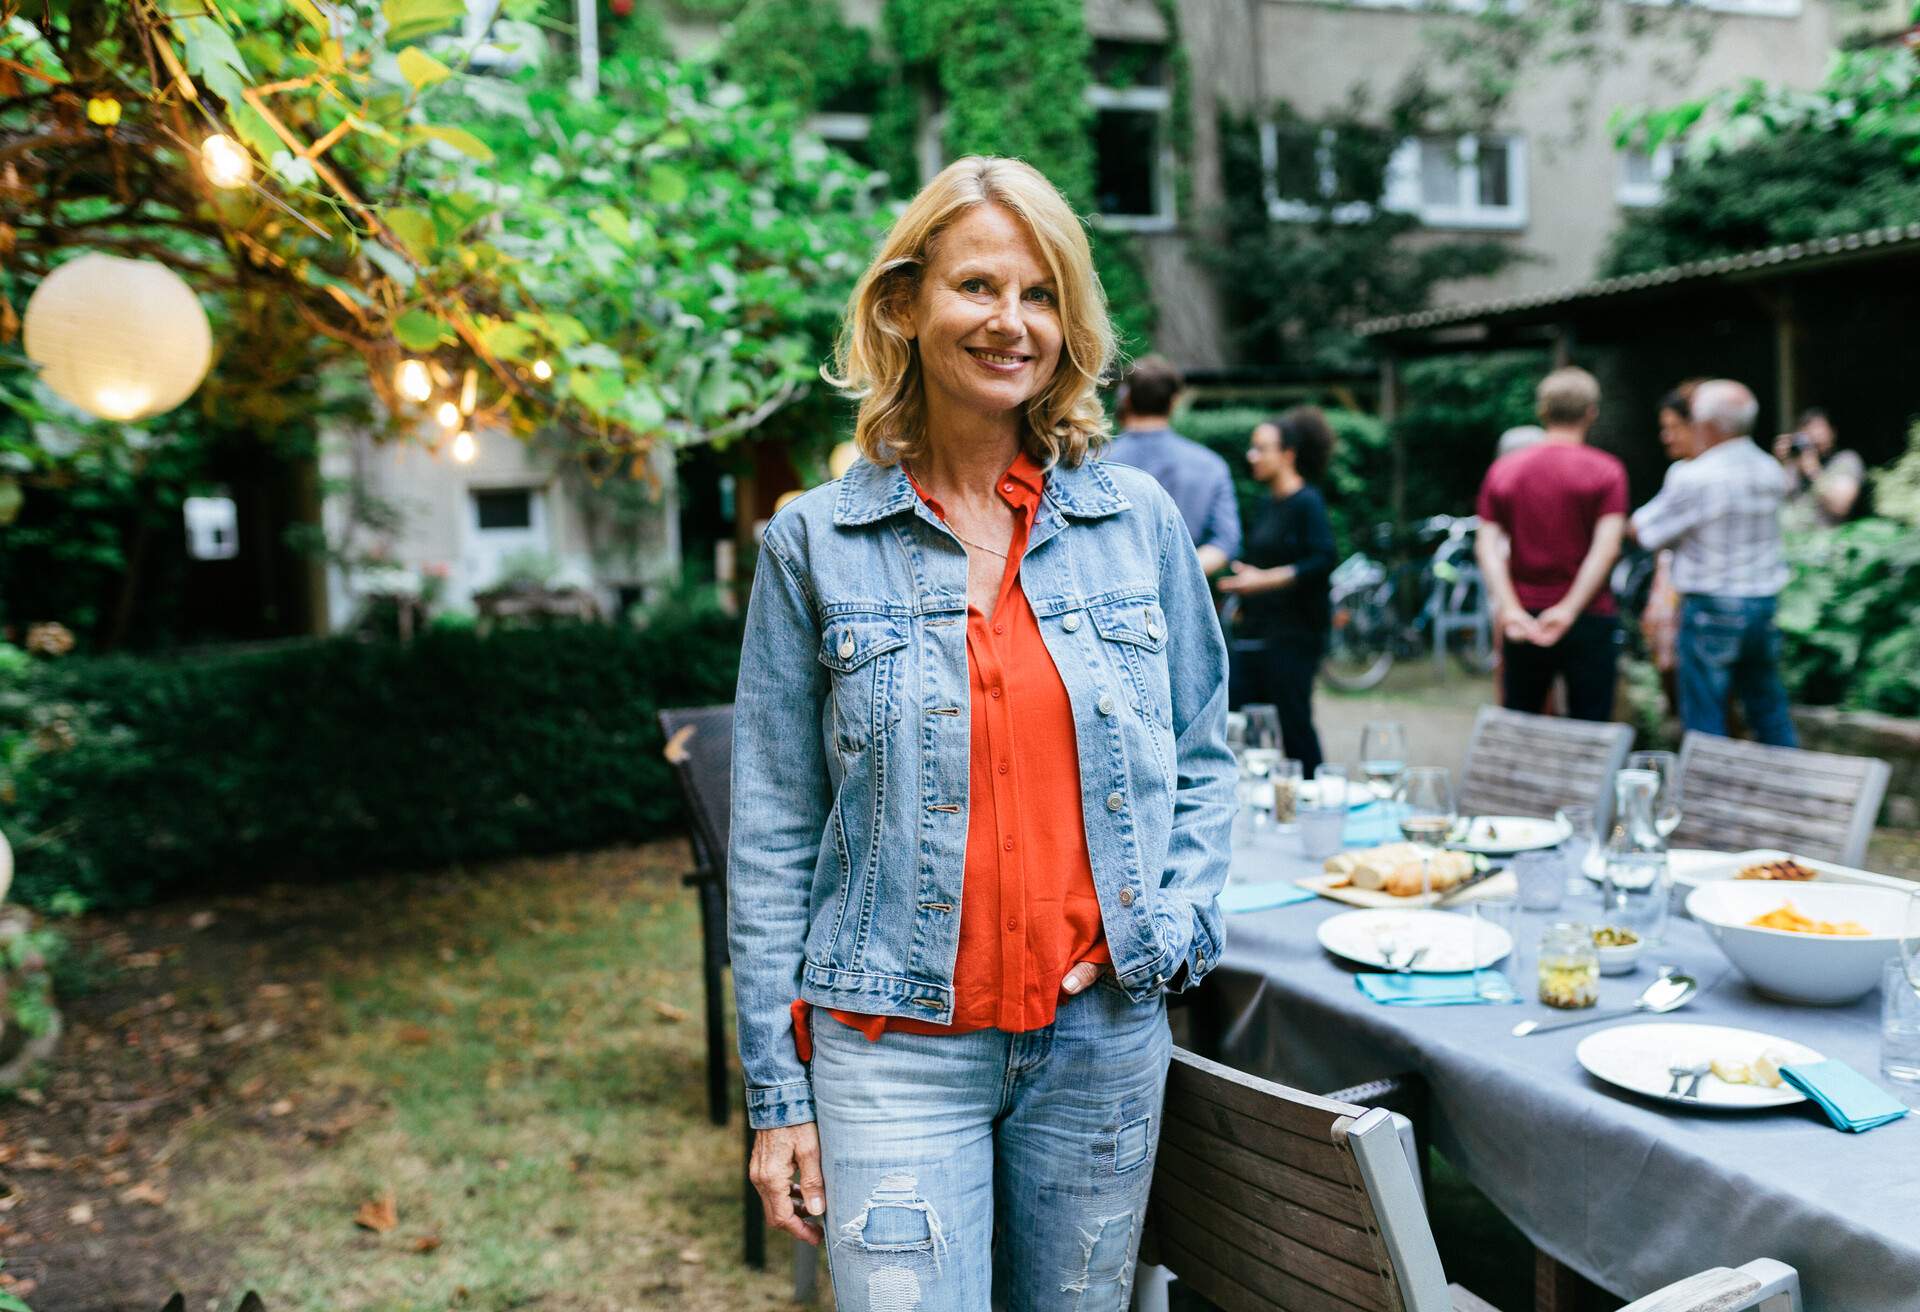 A portrait of a woman smiling after enjoying a barbecue meal with her family outdoors.